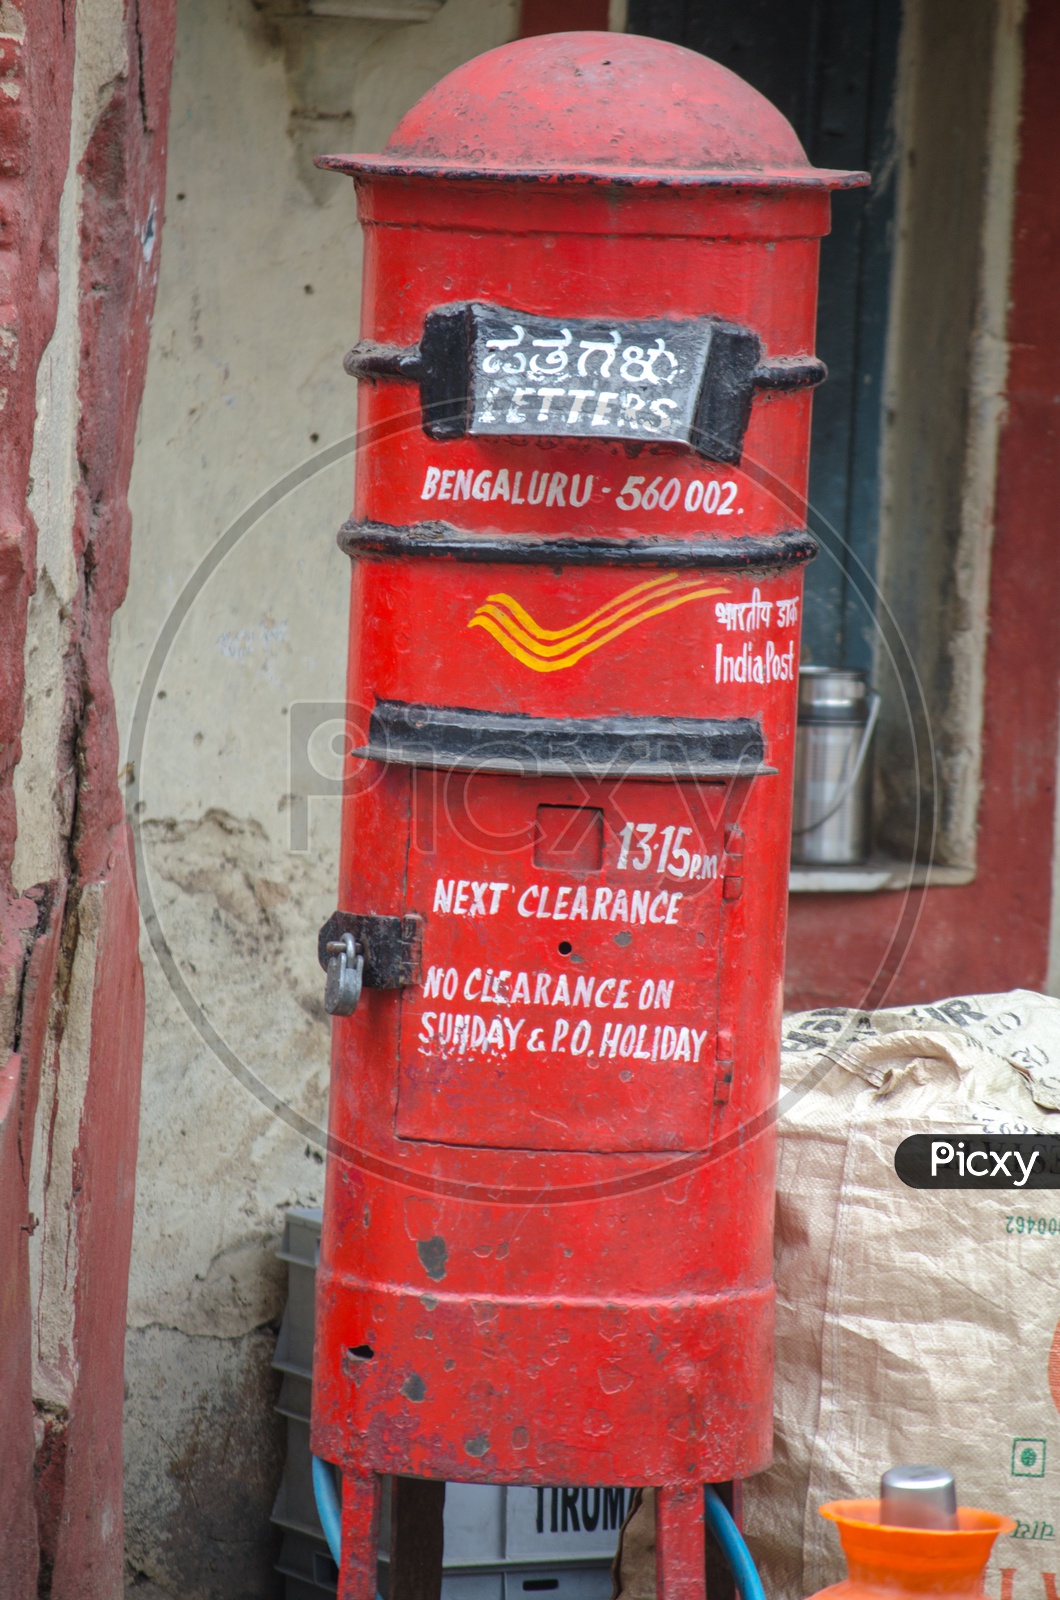 India Post  Post Box  With Timings Of Clearance